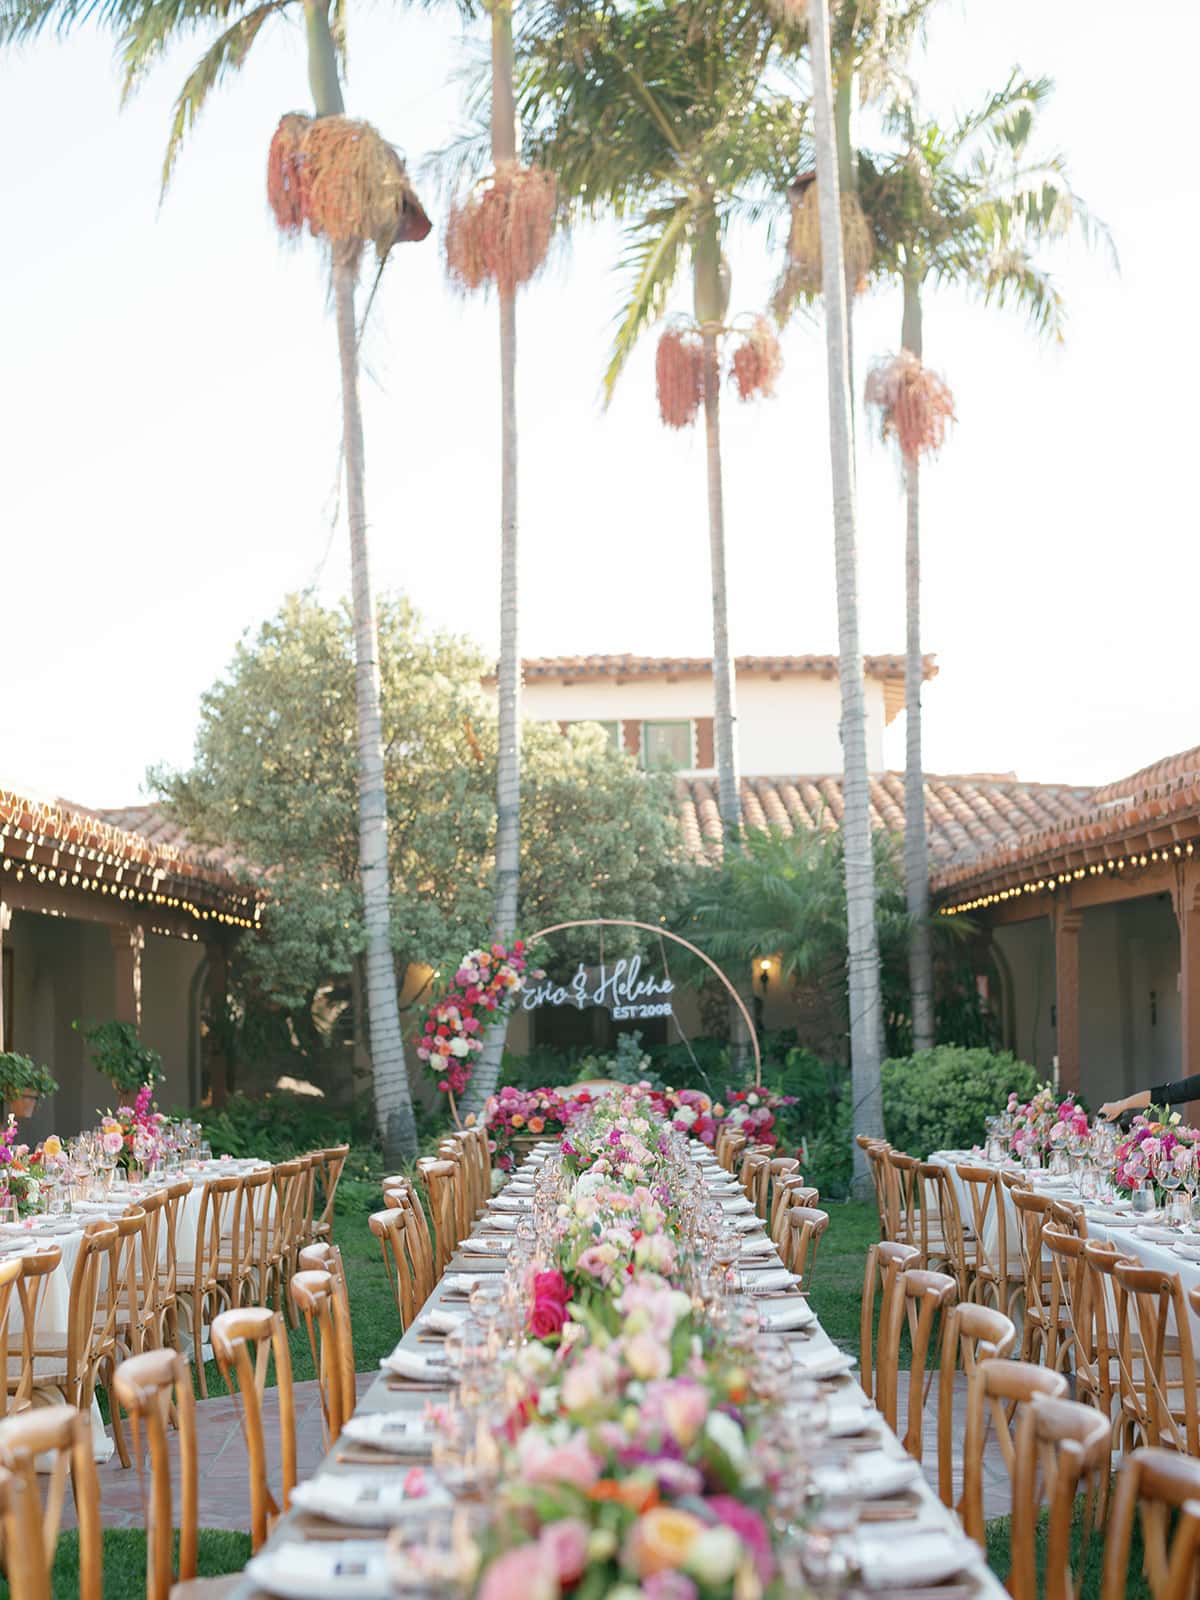 Casa Romantica reception with pink and white florals and a neon sign